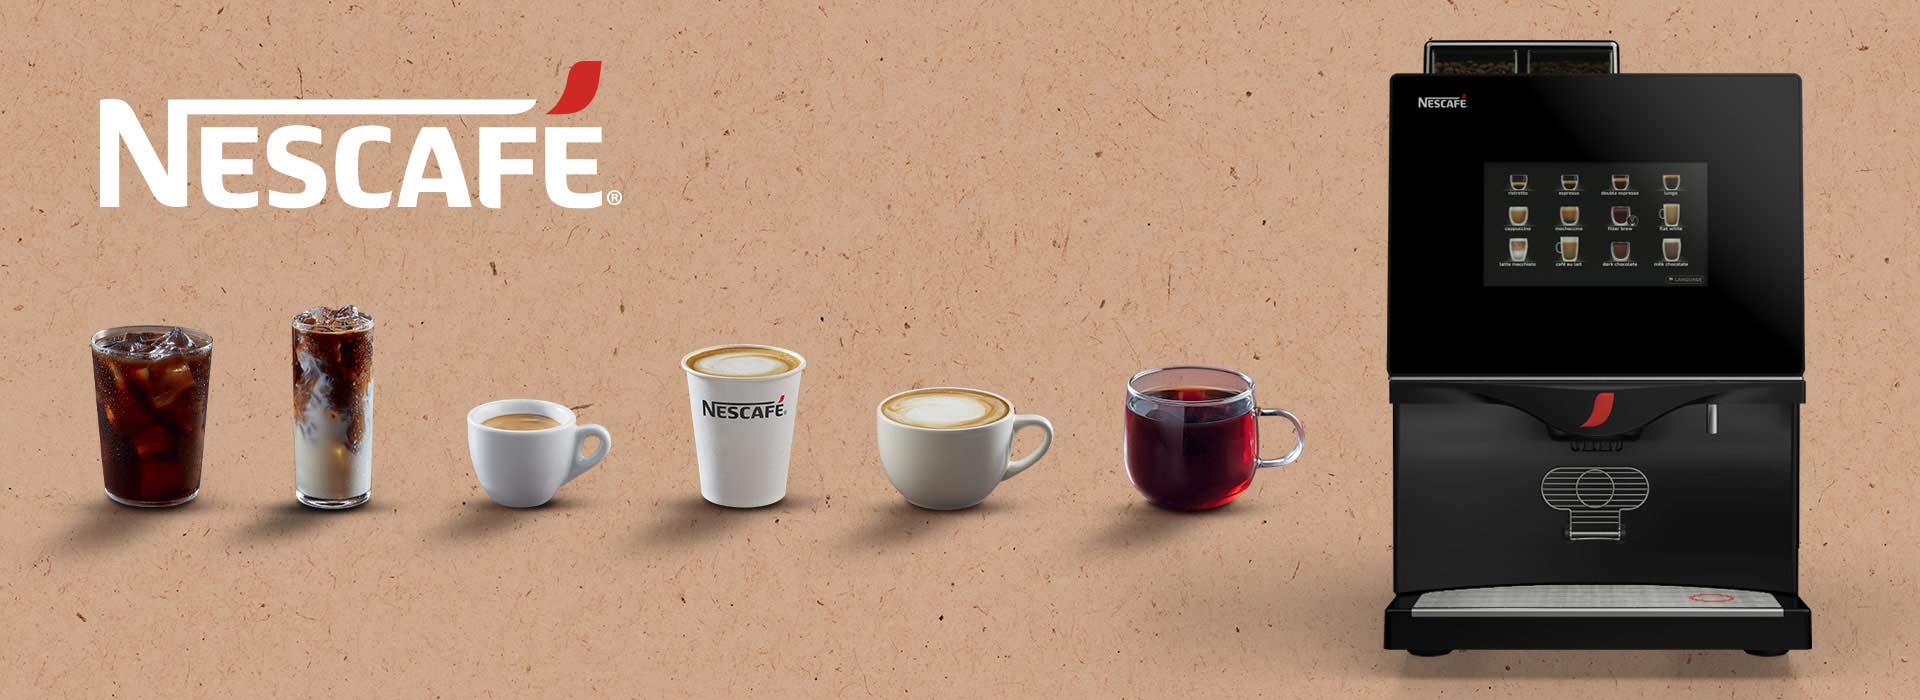 Nescafé Fusion coffee machine and beveraged in ATC's launch for Nestlé Professional